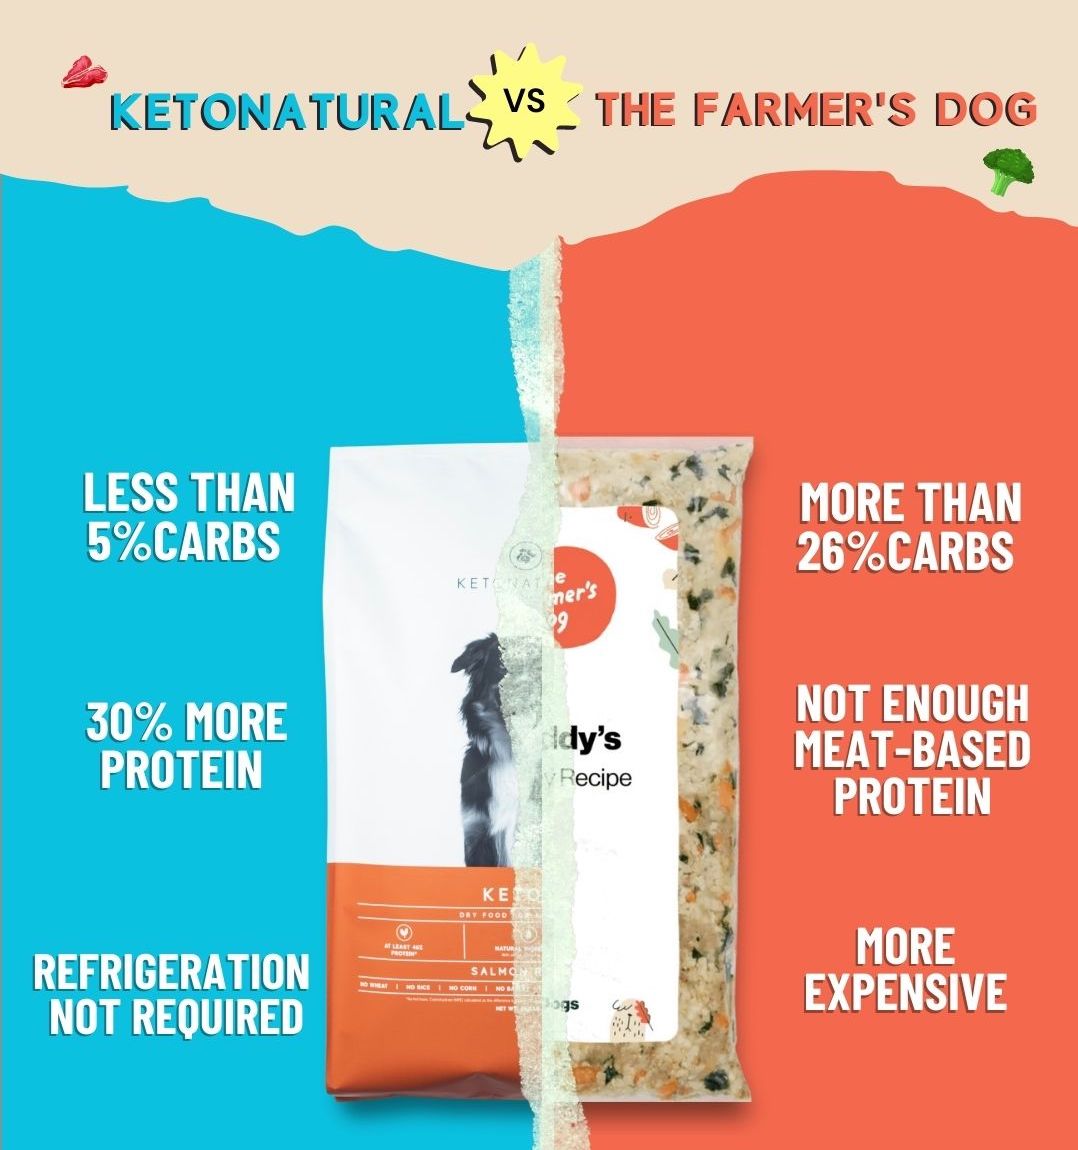 How Much Does The Farmer’s Dog Really Cost?